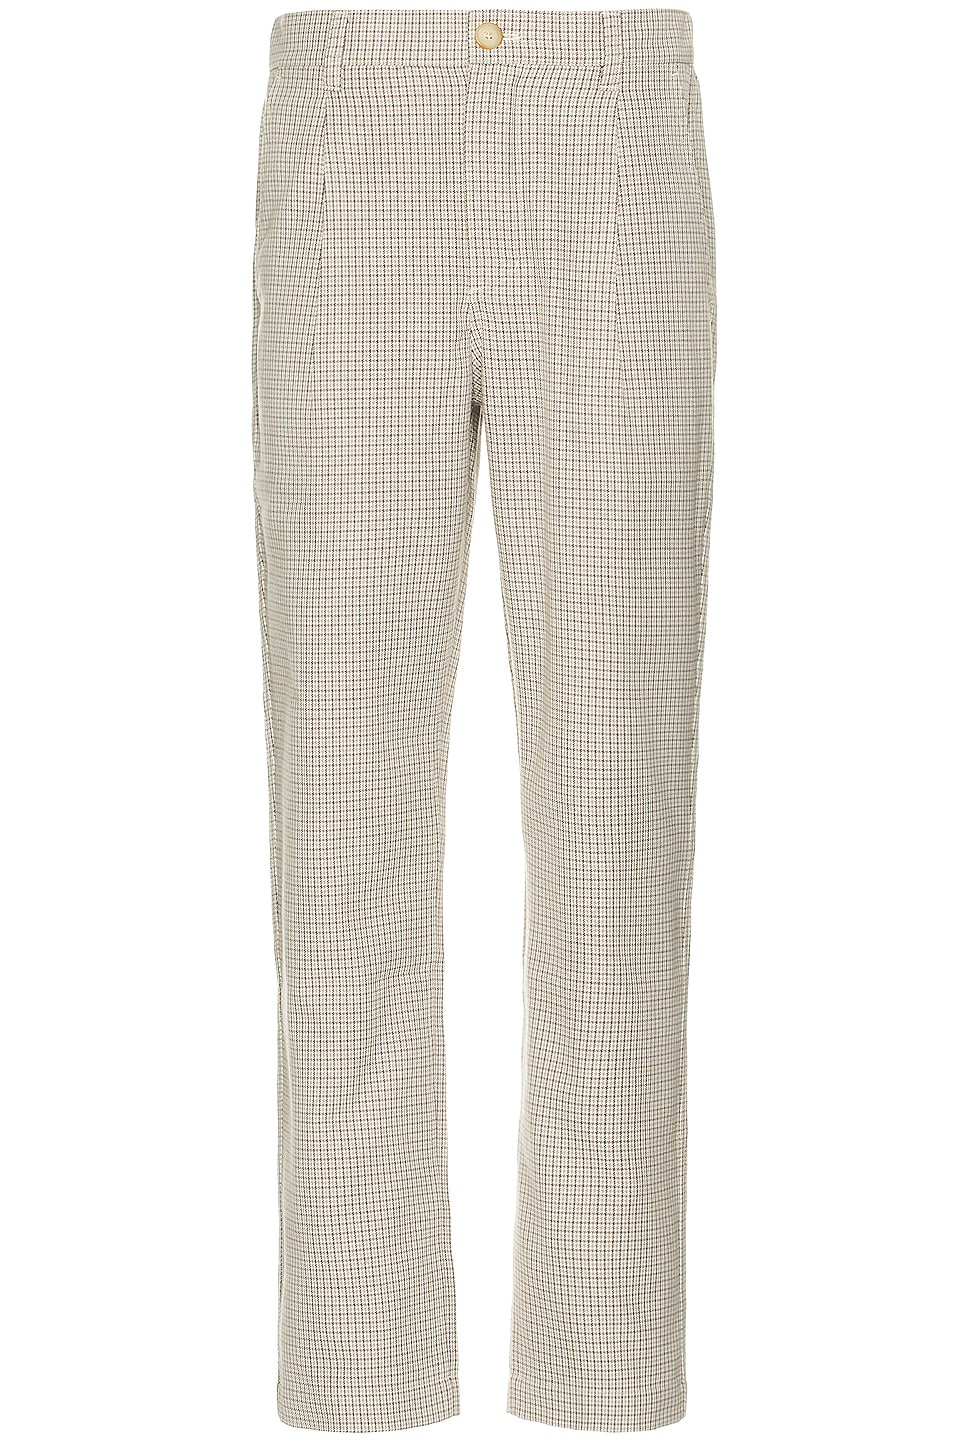 Image 1 of SATURDAYS NYC Dean Houndstooth Trouser in Bungee